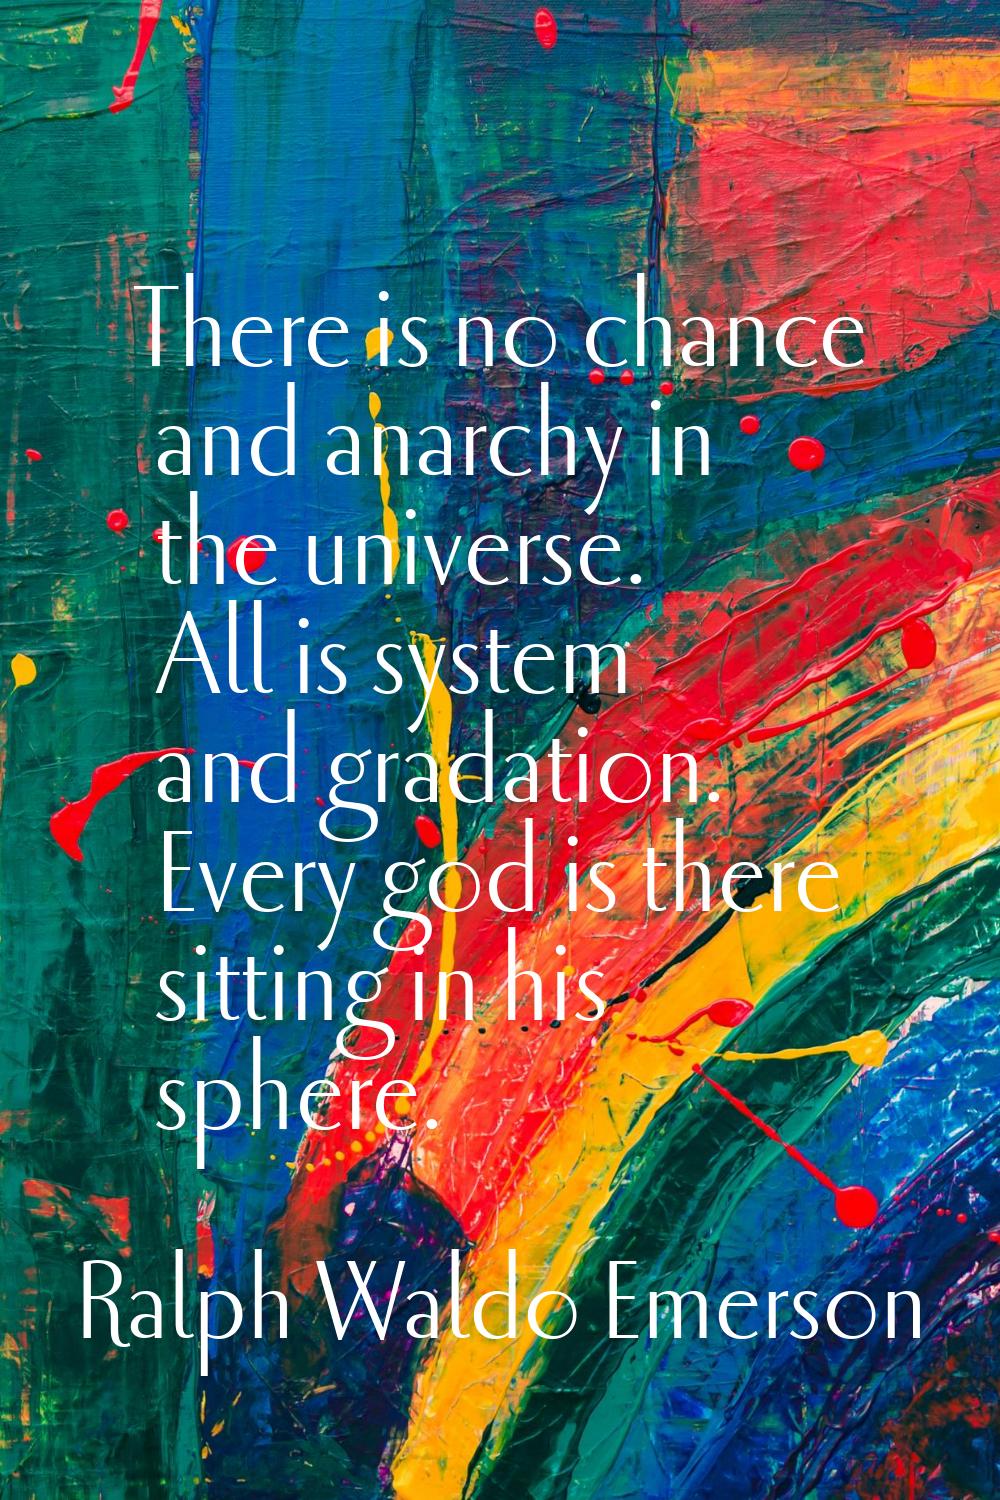 There is no chance and anarchy in the universe. All is system and gradation. Every god is there sit